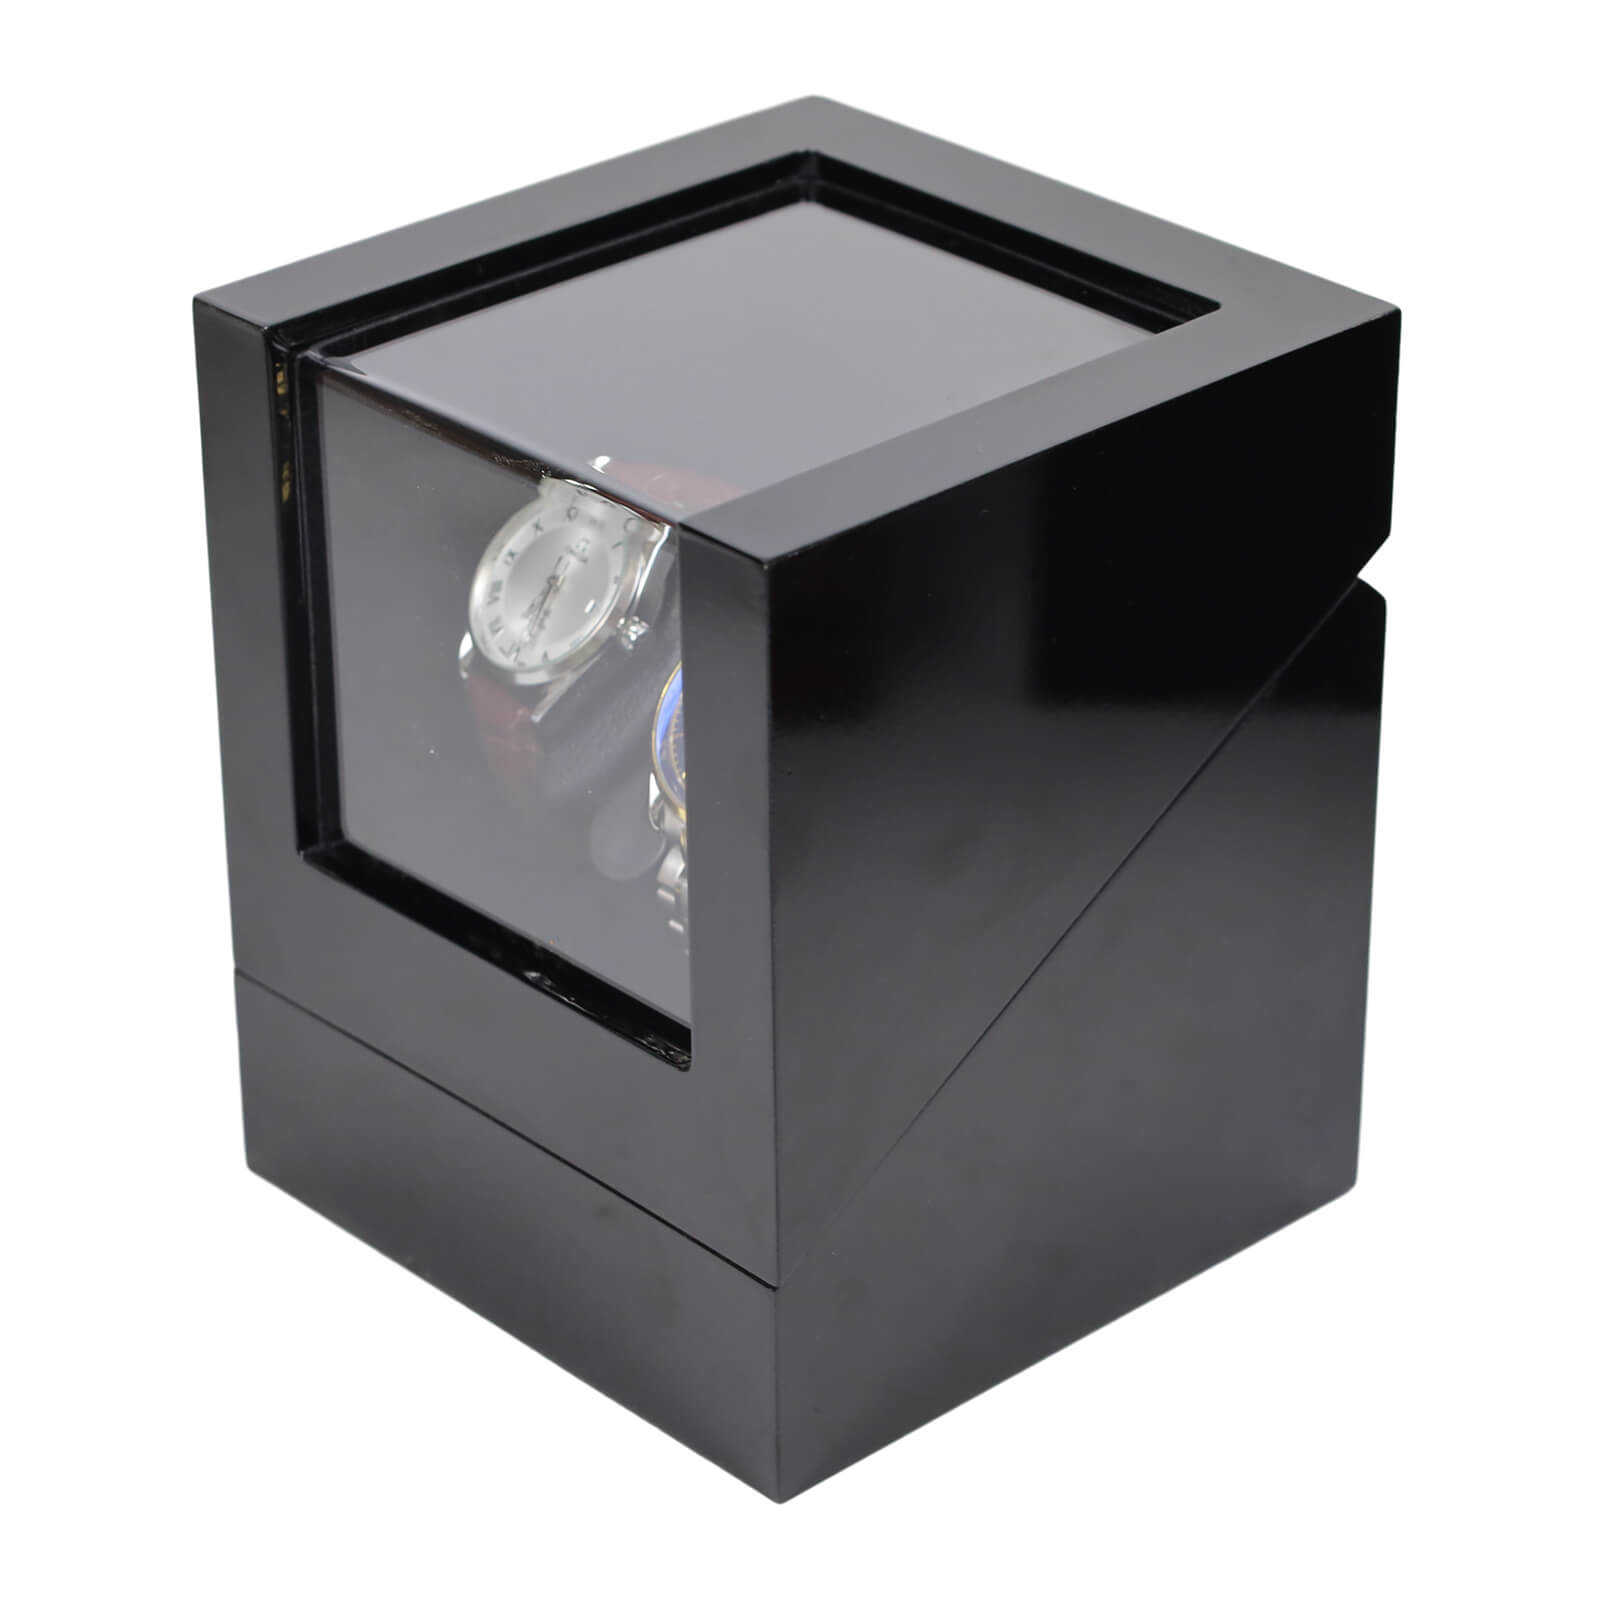 Double Watch Winder for Automatic Watches with Flexible Plush Pillow Super Quiet Motor- Black